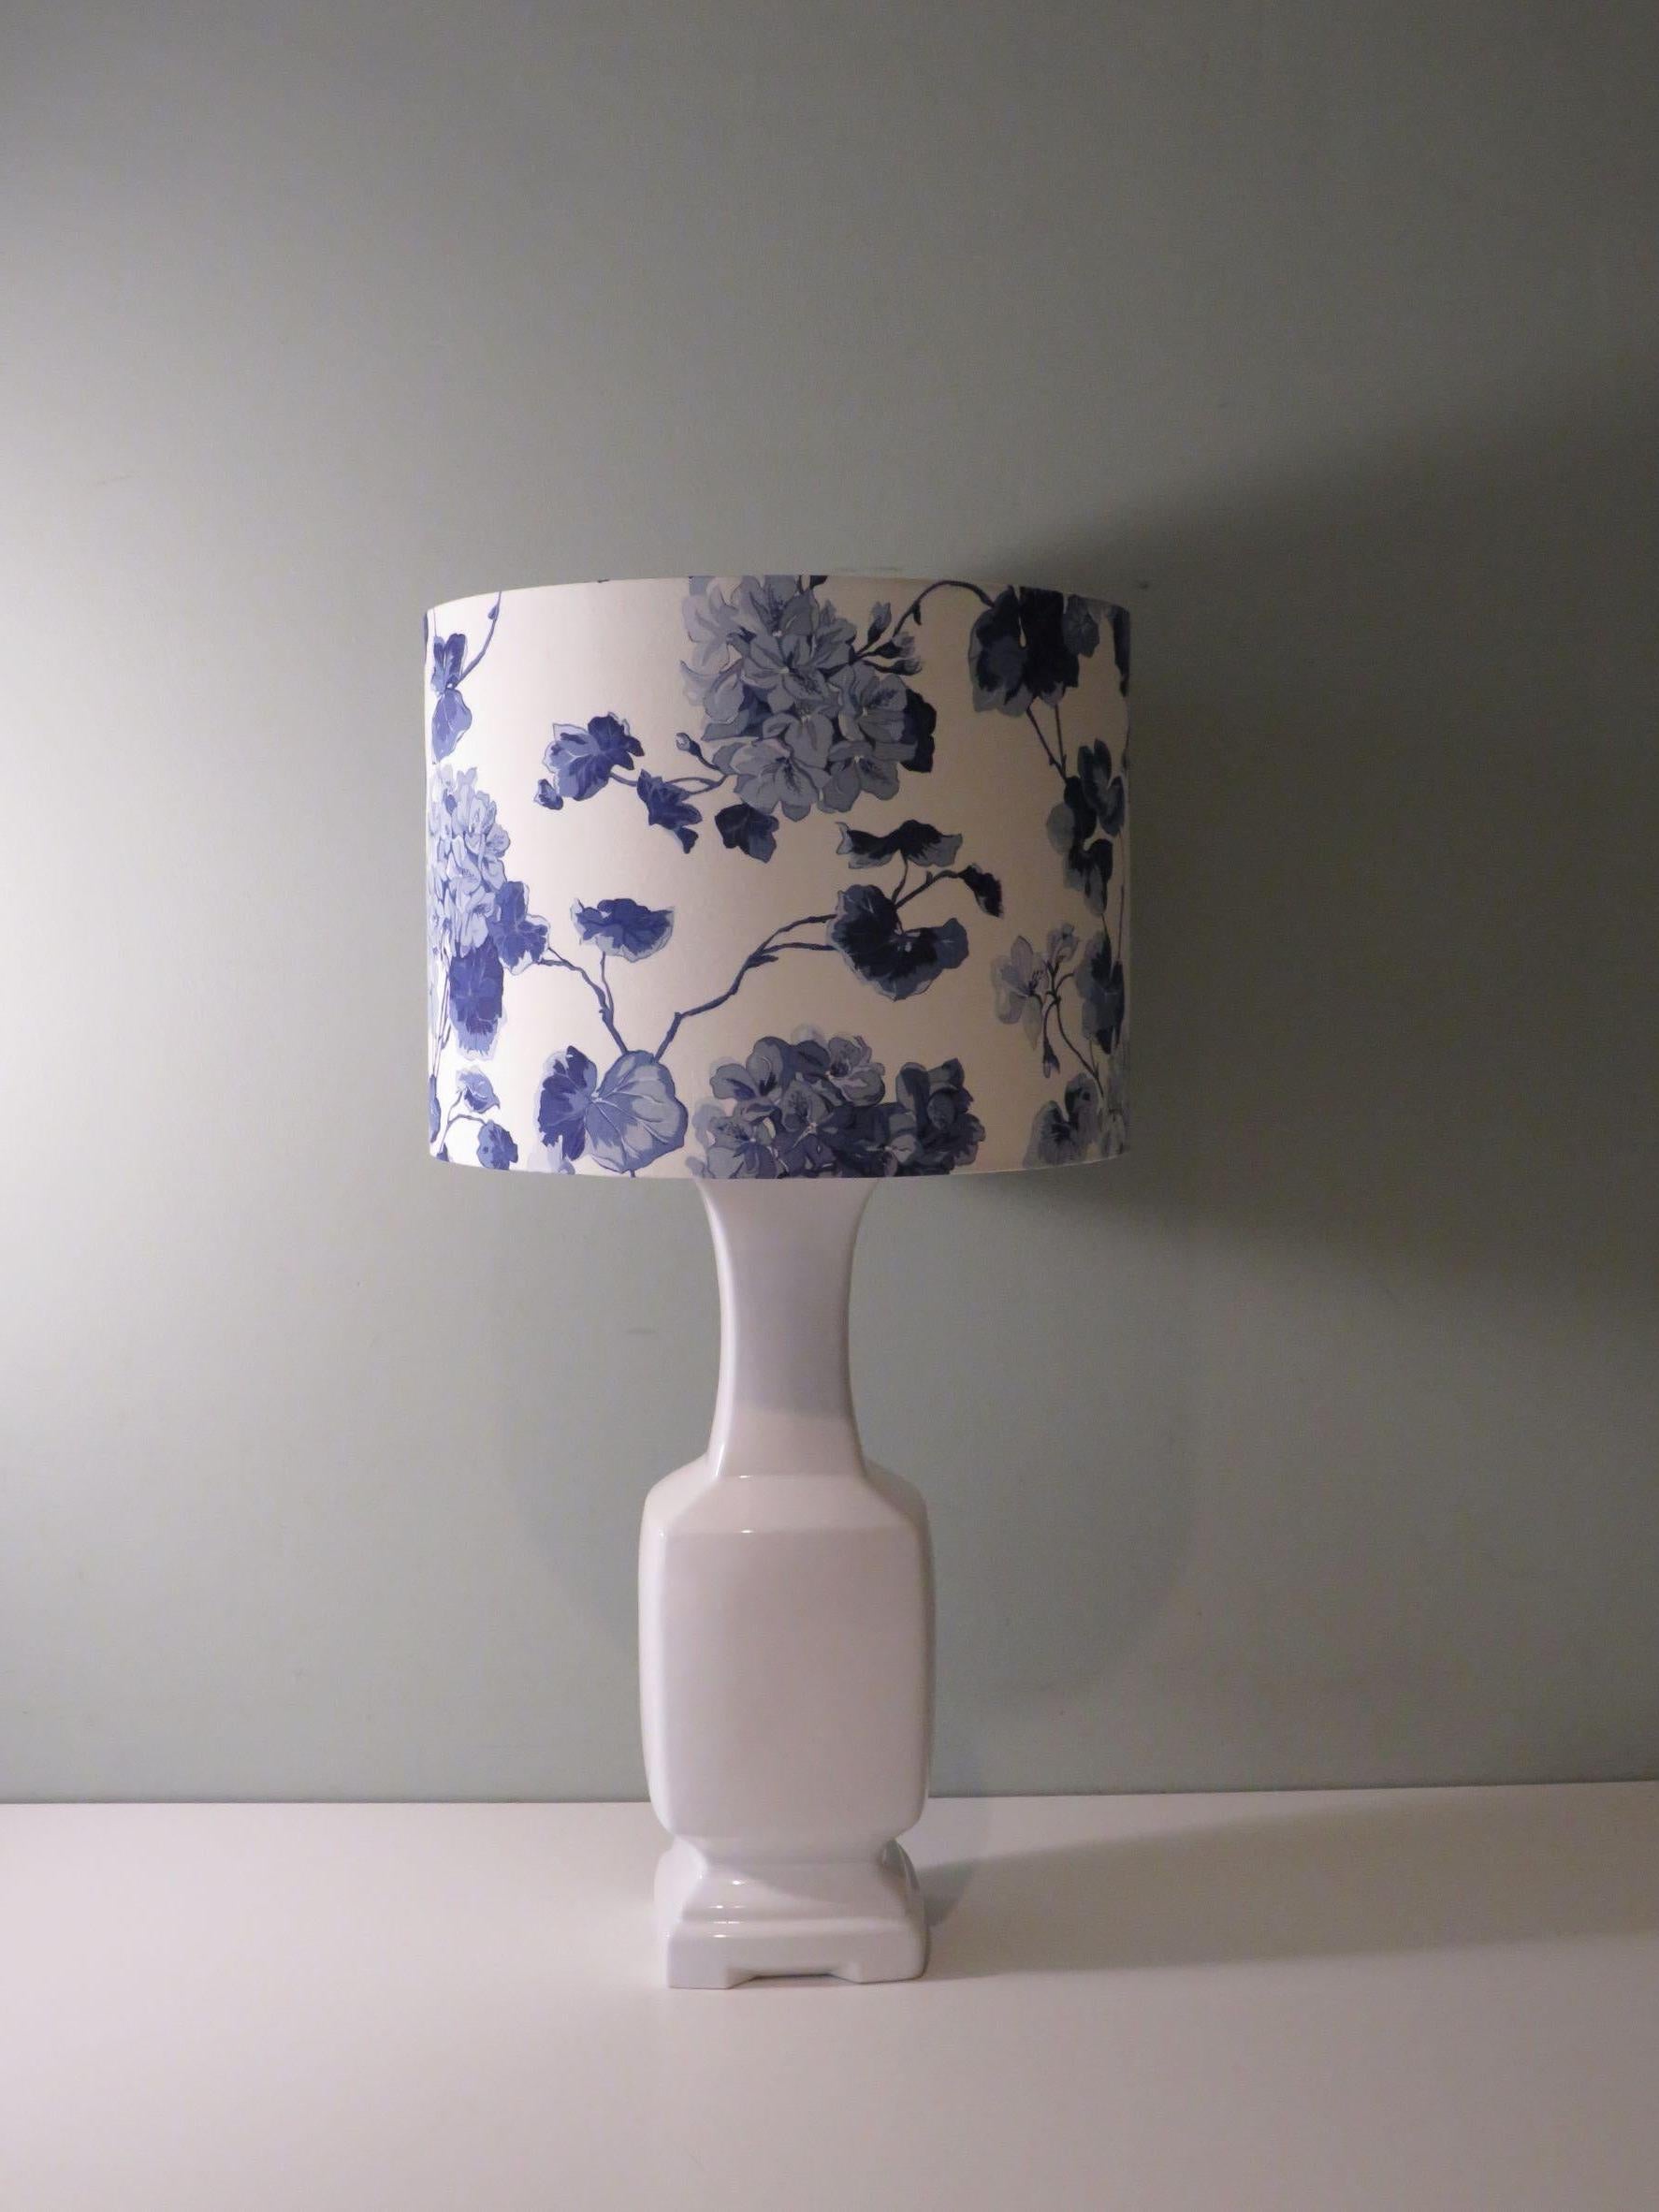 Large white ceramic table lamp with a new professionally handmade lampshade with Ralph Lauren floral fabric.
The lamp is equipped with 1 E 27 fitting.
Dimensions:
Lamp base: height 48 cm and length 14.5 cm, width 14.5 cm
Lampshade: Height 26.5